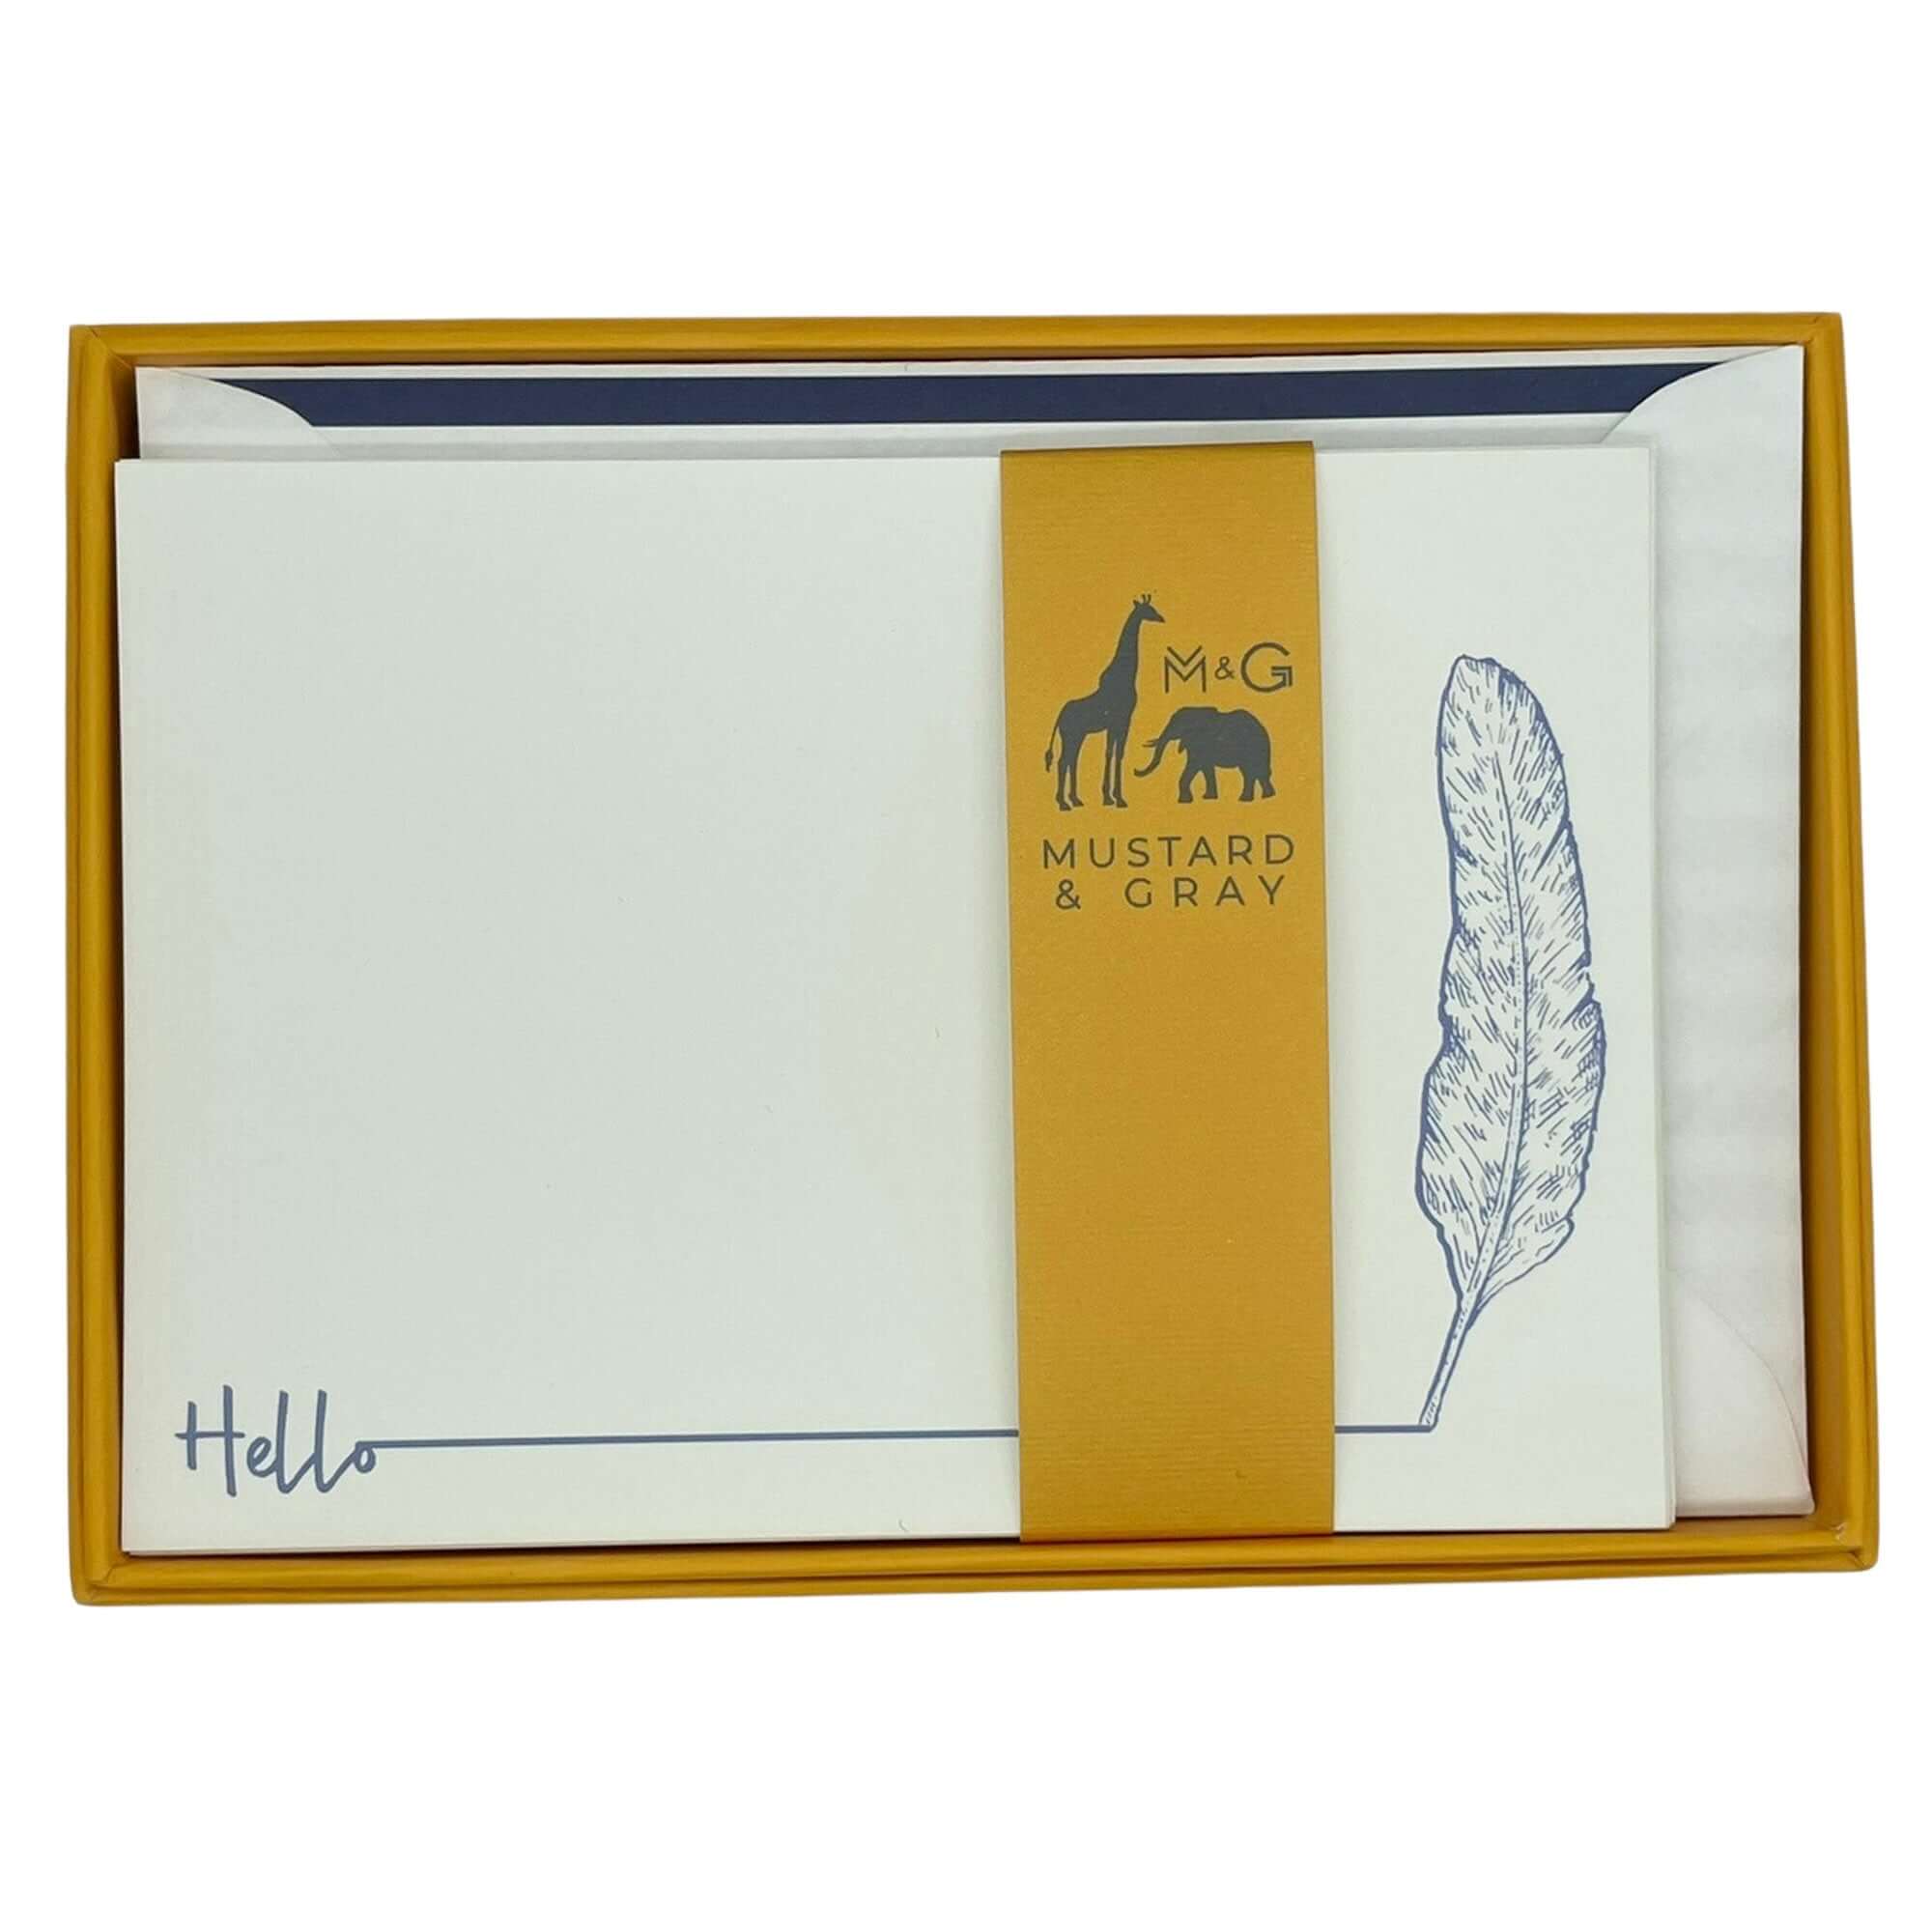 Hello Feather Notecard Set with Lined Envelopes